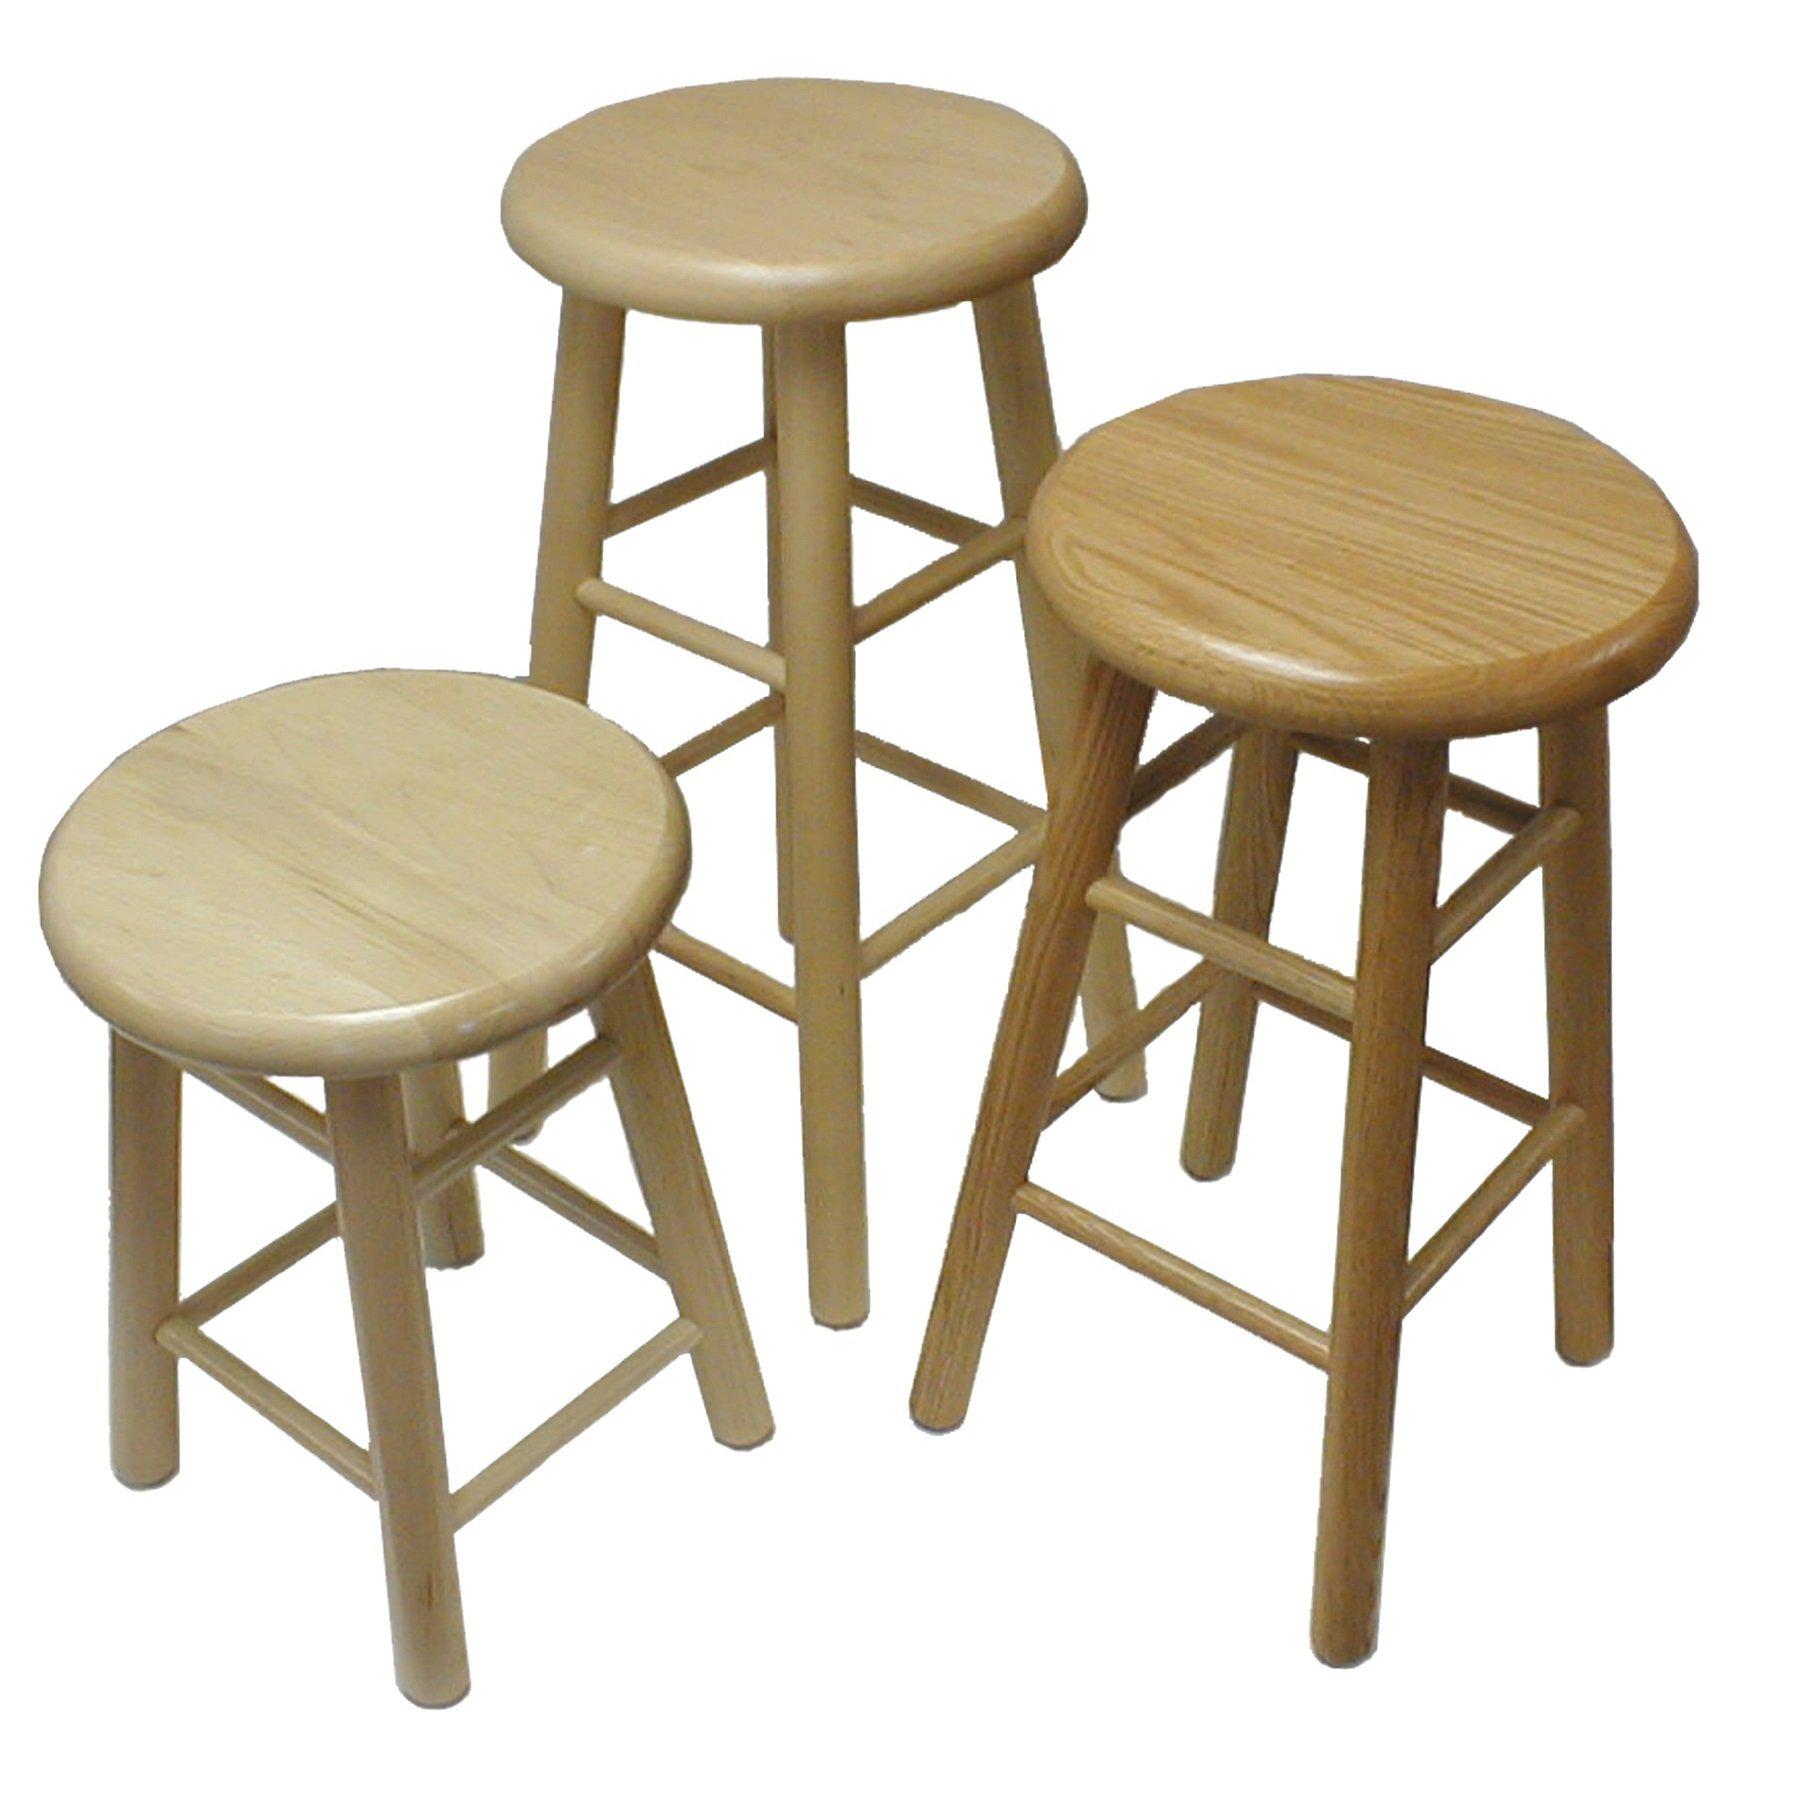 Solid Wood Stool, 18" High